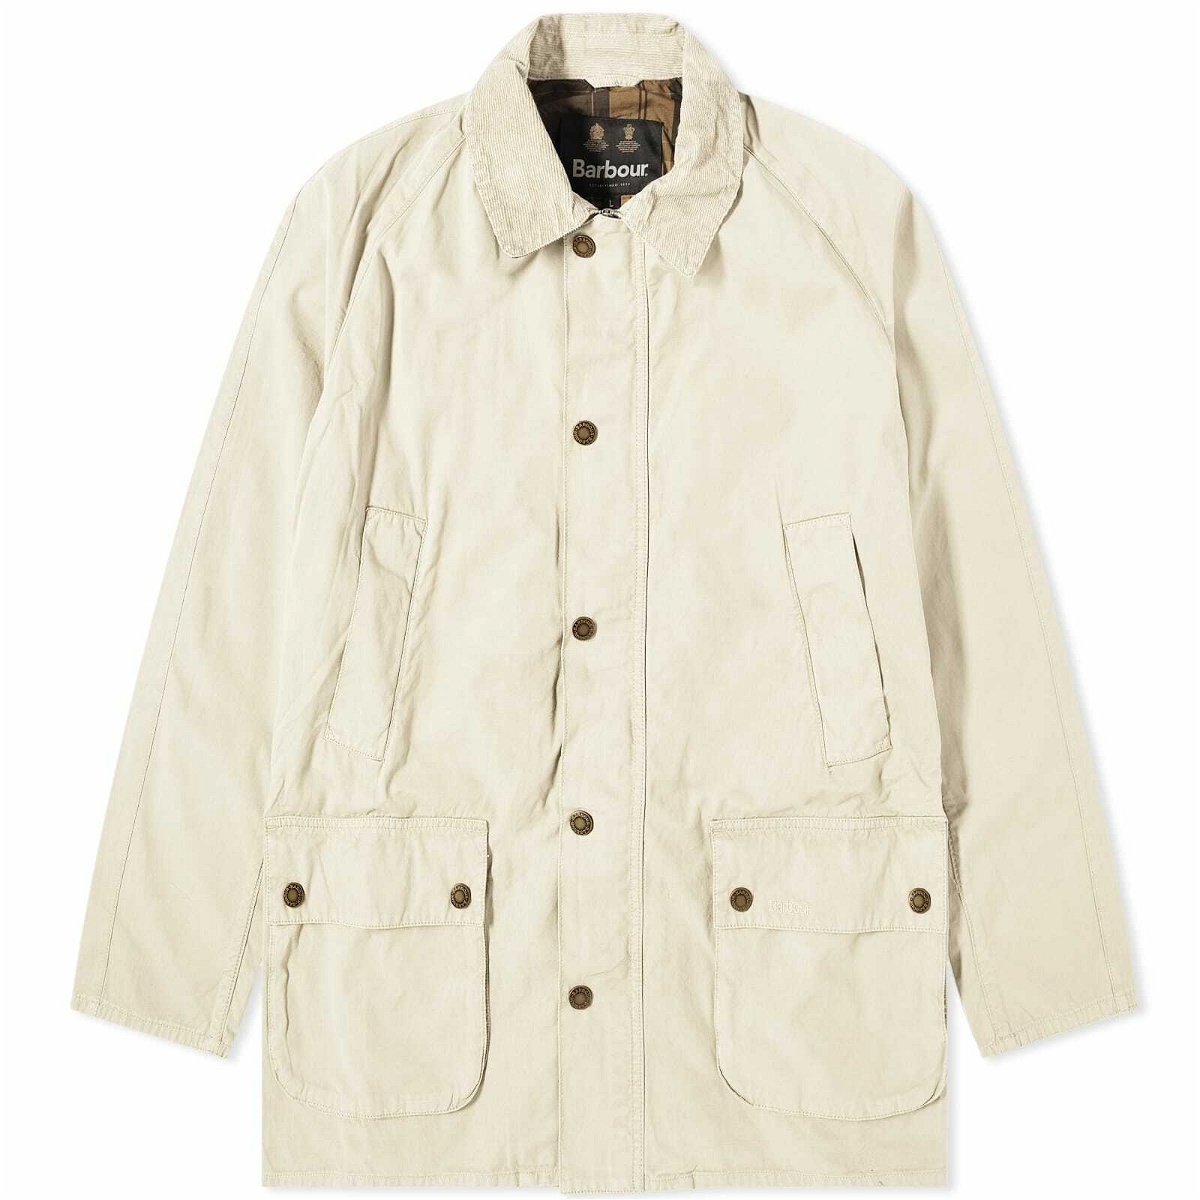 Barbour Men's Ashby Casual Jacket in Mist Barbour